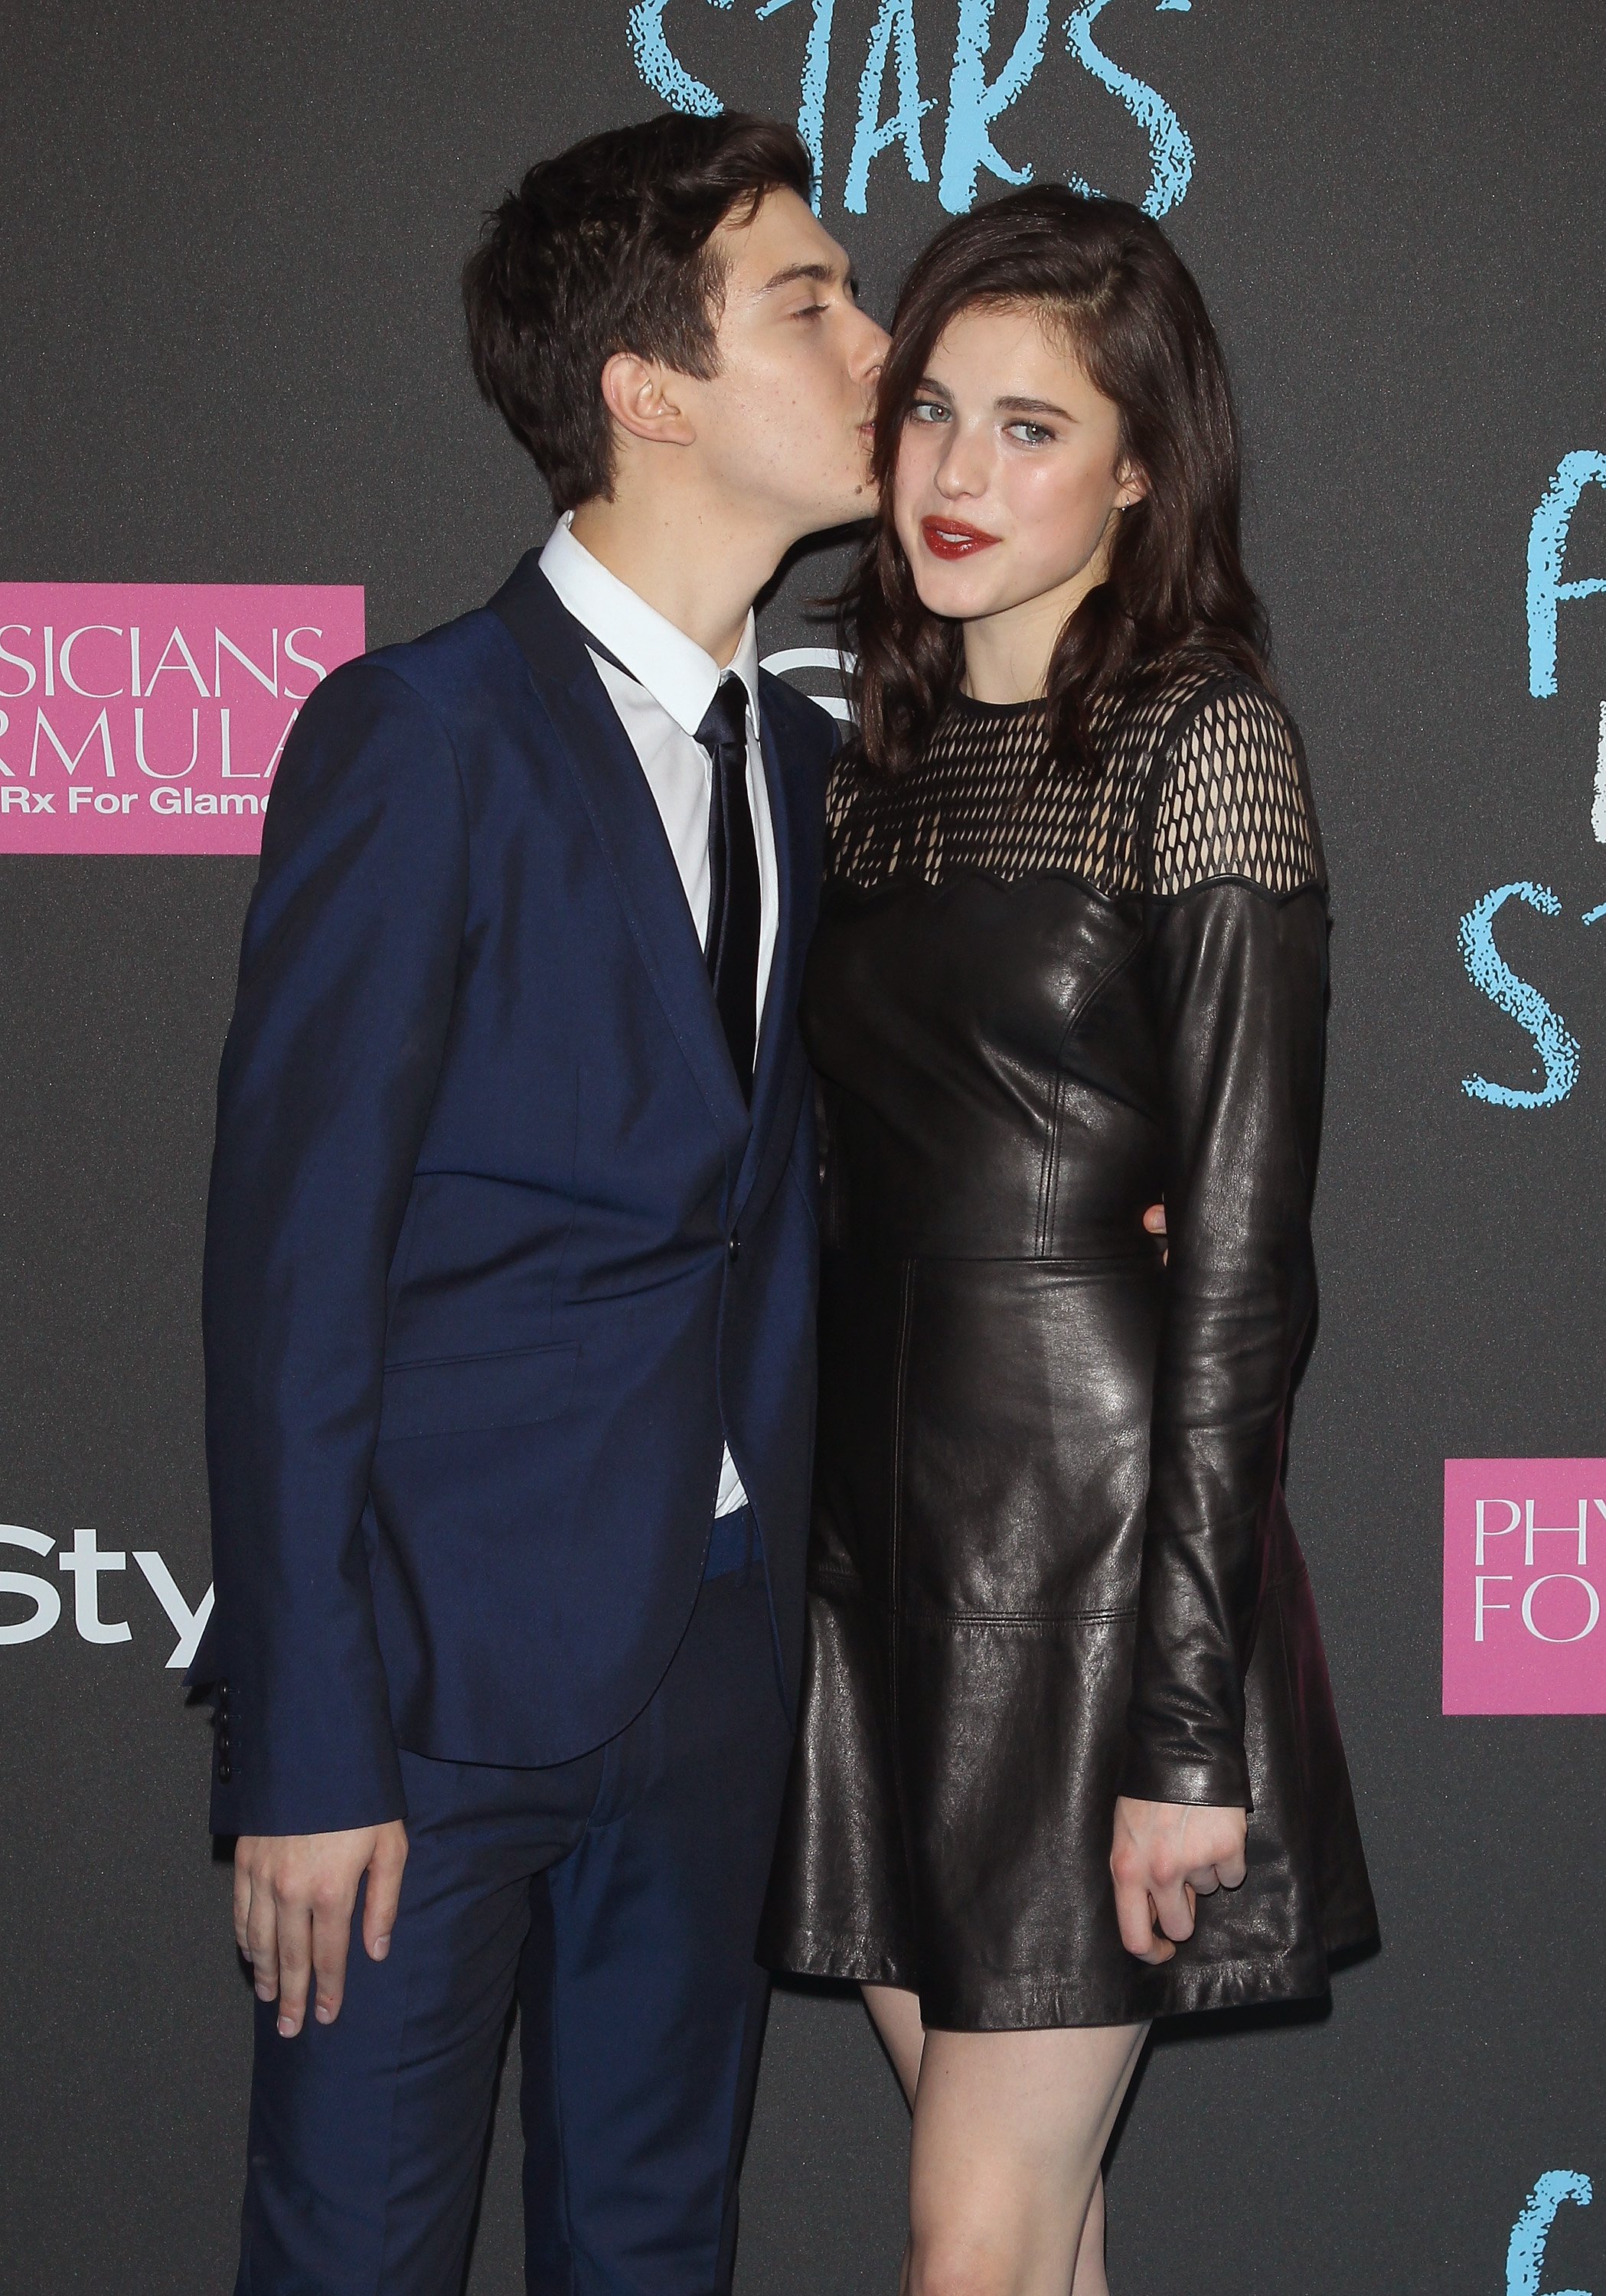 Nat Wolff and Margaret Qualley at the premiere of "The Fault In Our Stars" on June 2, 2014, in New York City. | Source: Getty Images